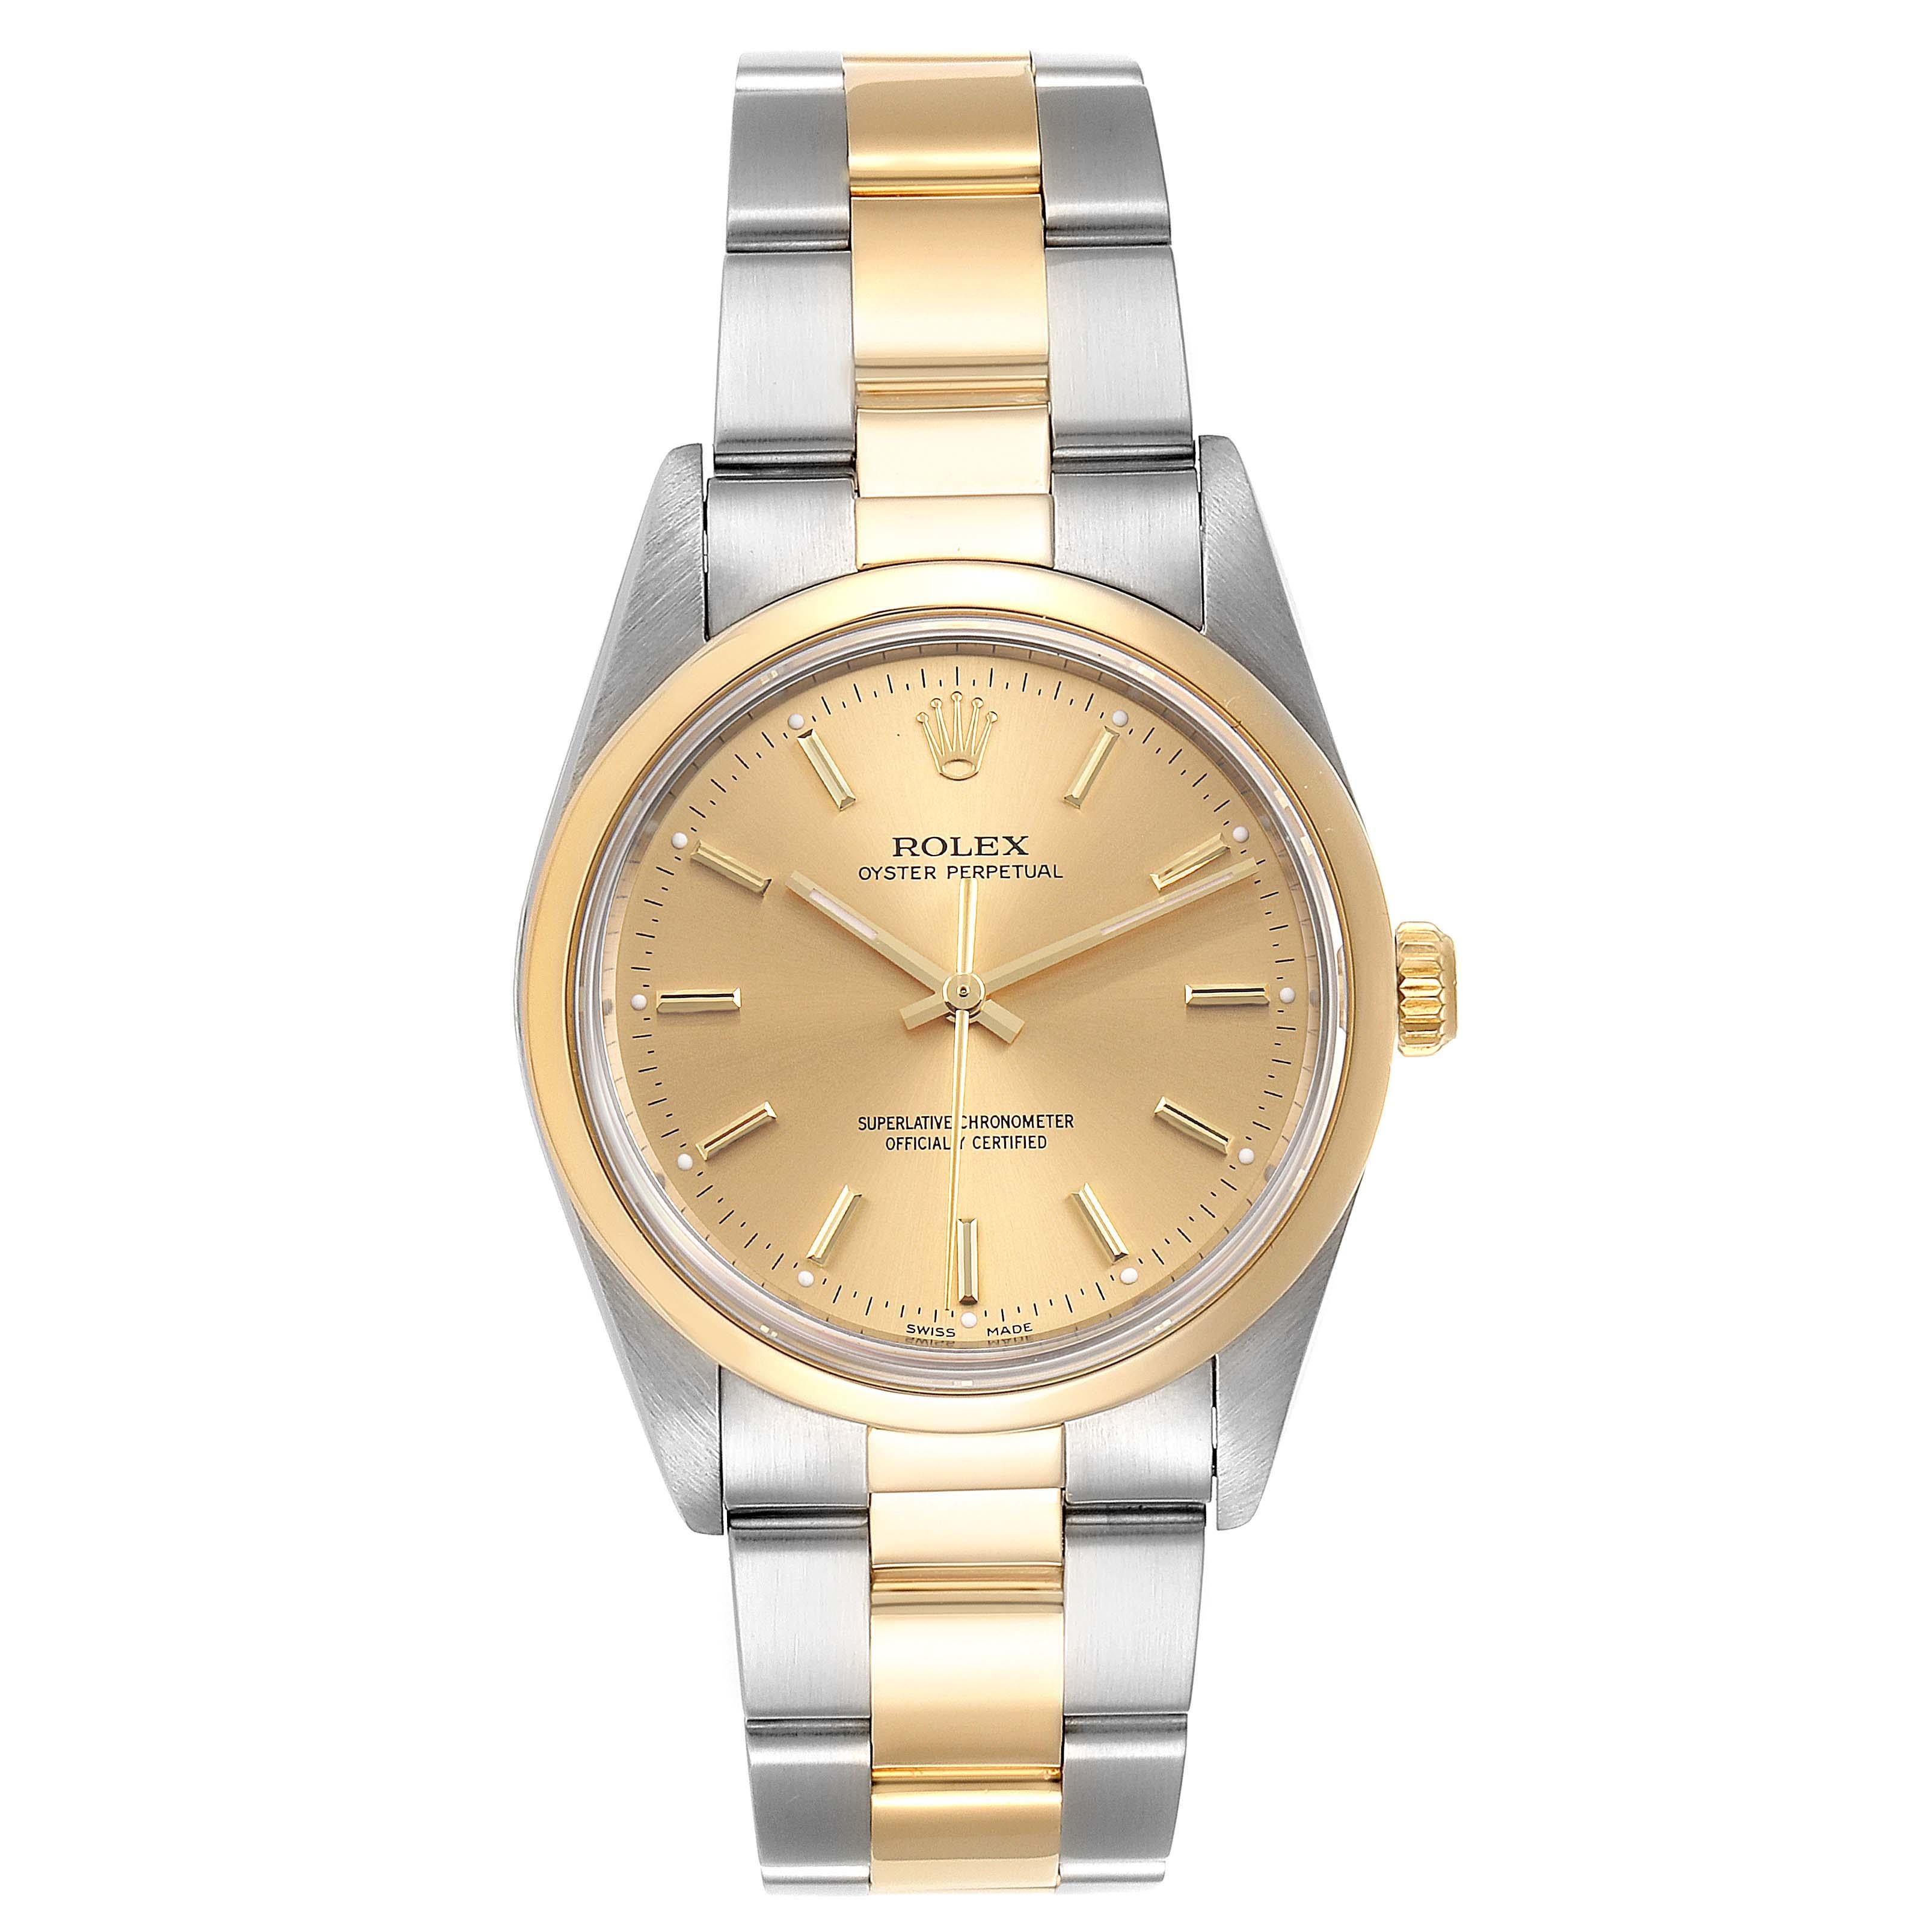 Rolex Oyster Perpetual Nondate Steel Yellow Gold Mens Watch 14203. Officially certified chronometer self-winding movement. Stainless steel and 18K yellow gold oyster case 34.0 mm in diameter. Rolex logo on a crown. 18K yellow gold smooth domed